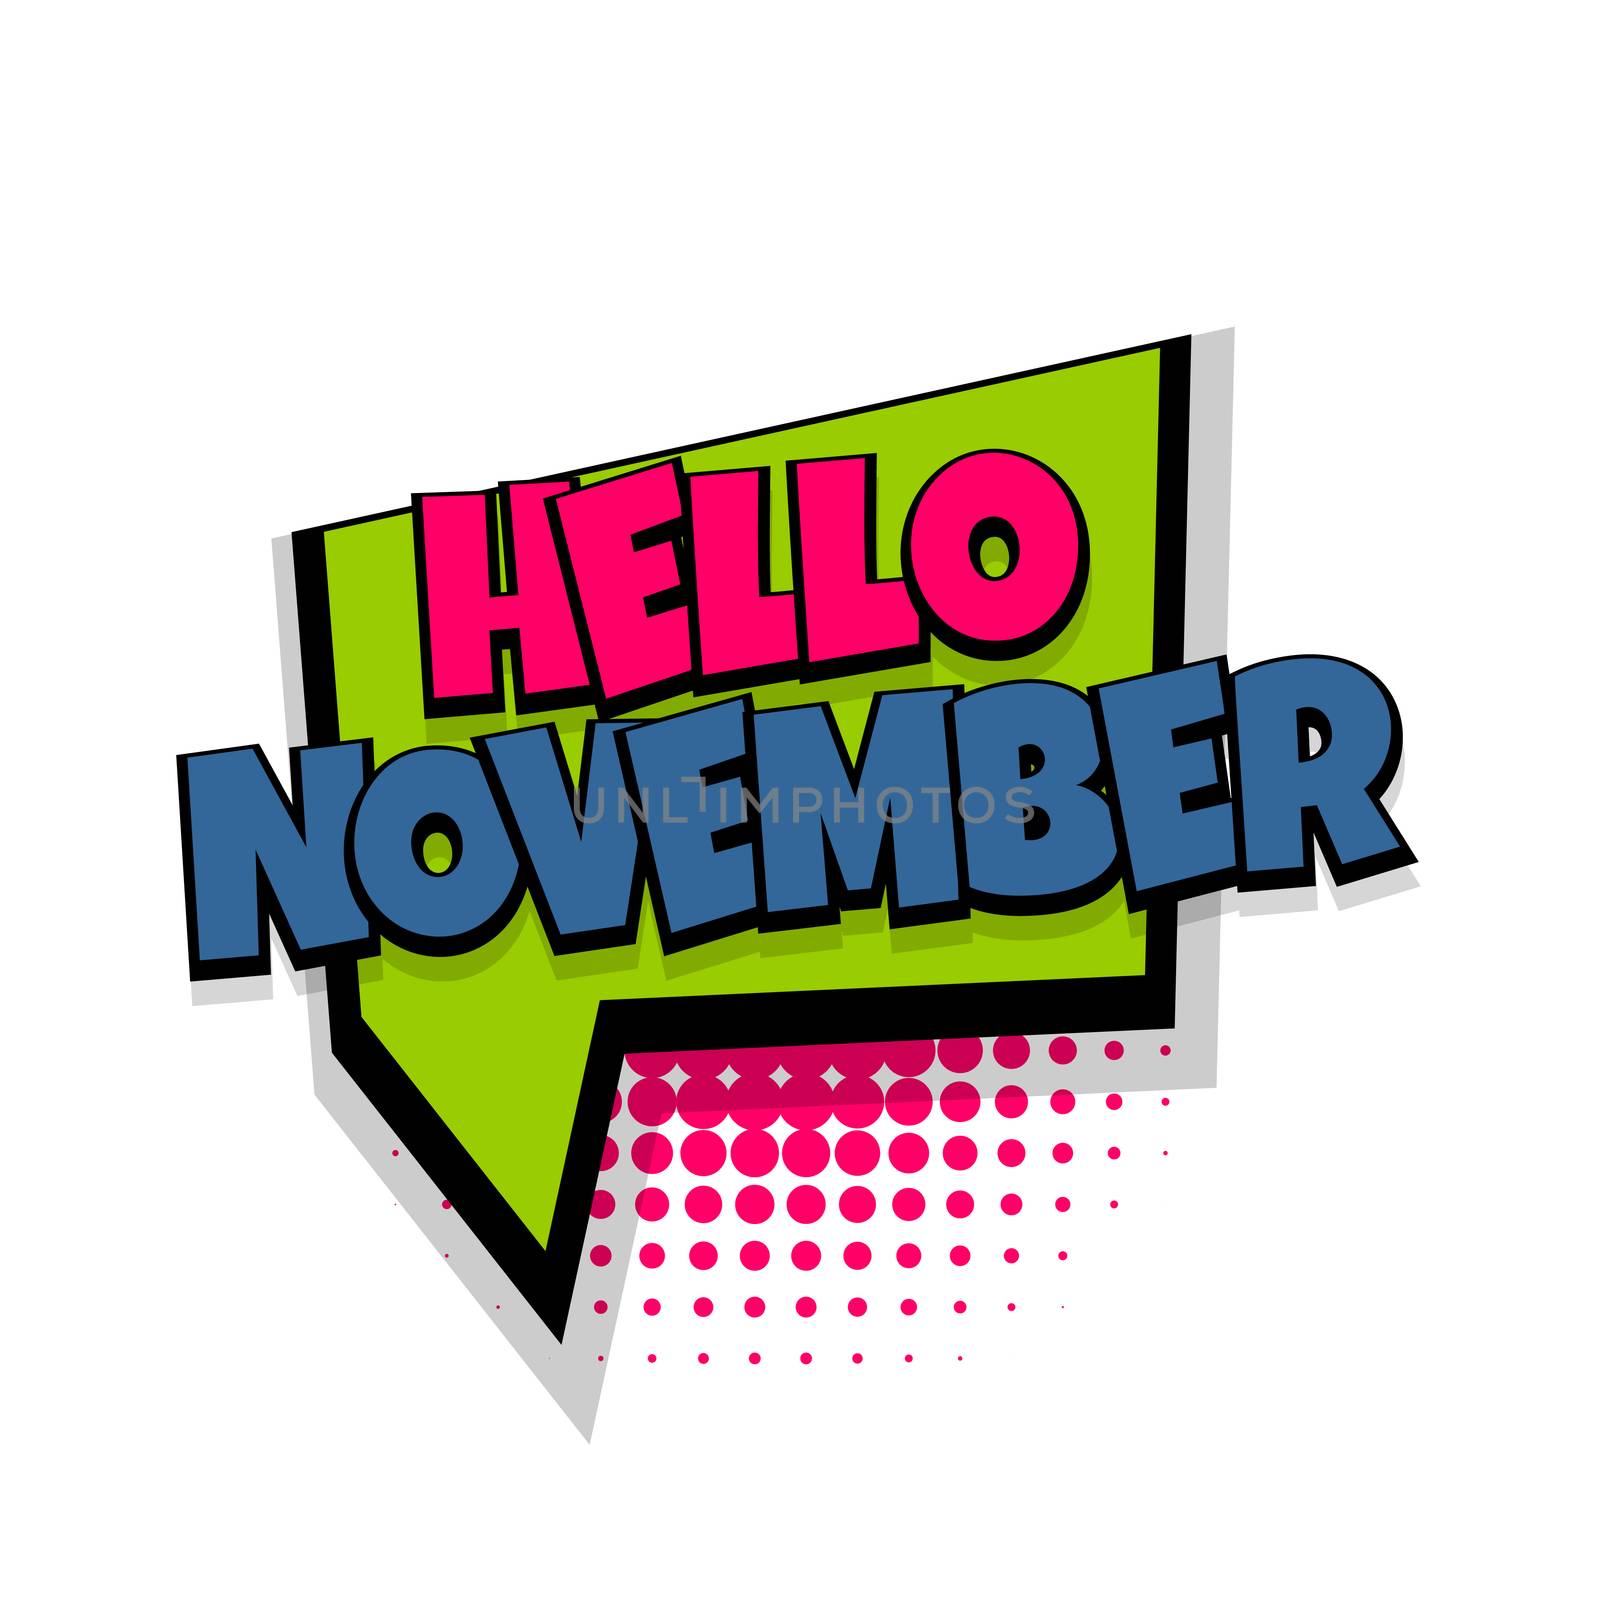 Lettering november month greeting. Comics book balloon. Bubble icon speech phrase. Cartoon font label tag expression. Comic text sound effects. Sounds vector illustration.